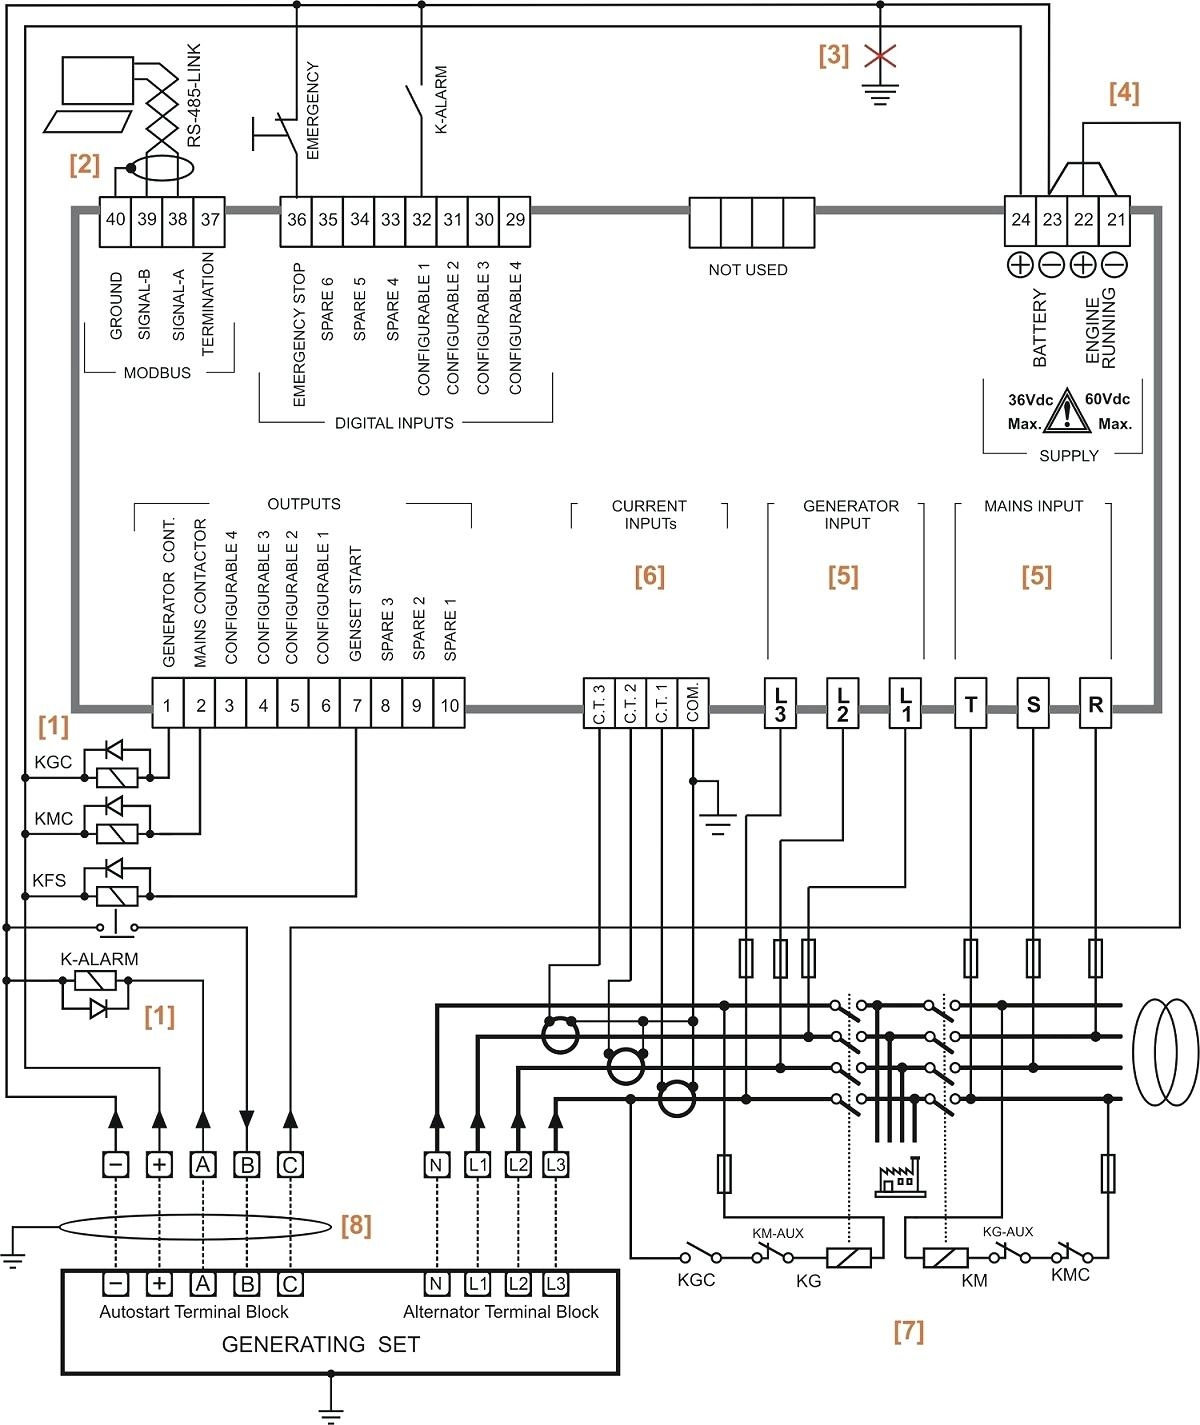 Automatic Transfer Switch Wiring Diagram Free - Simple Wiring Diagram - Rv Automatic Transfer Switch Wiring Diagram